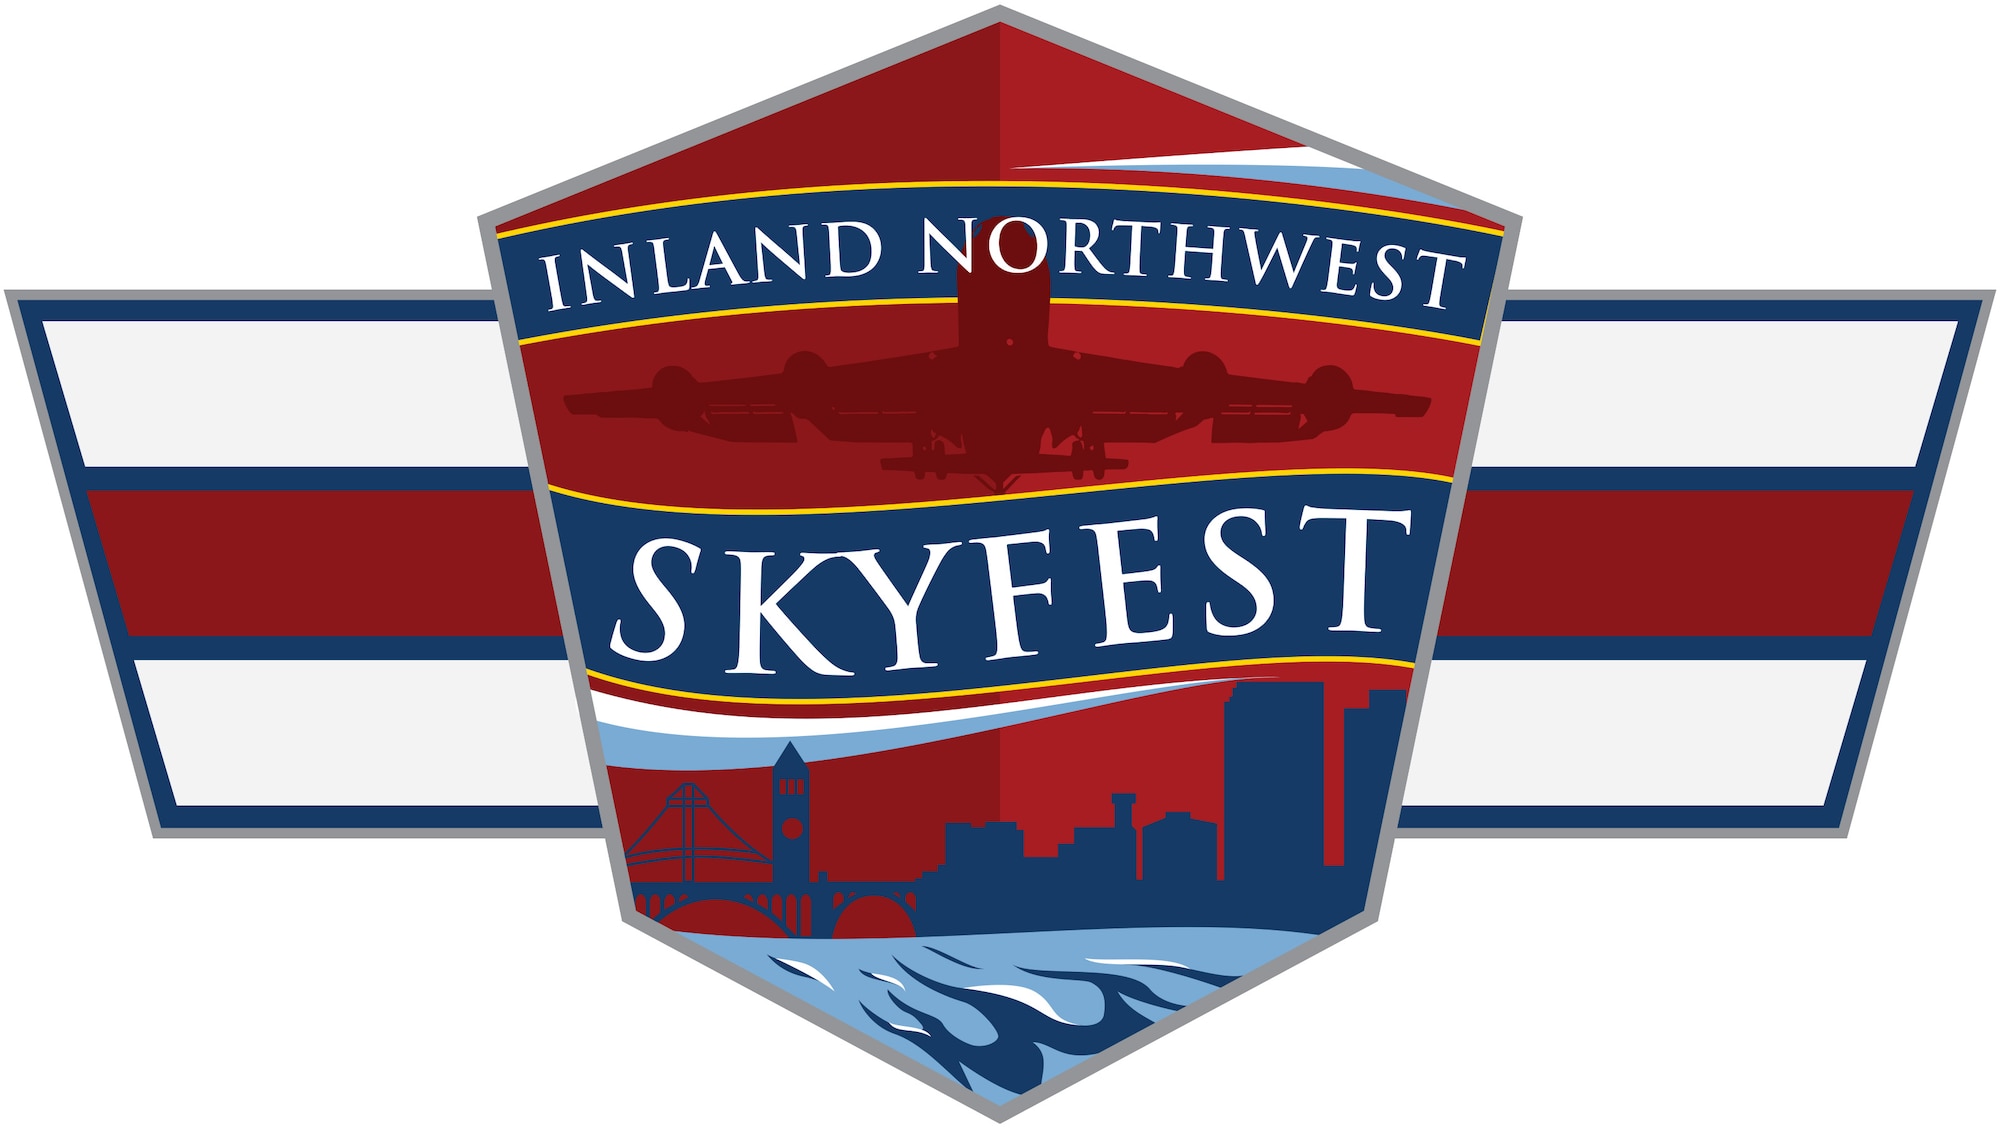 Team Fairchild is scheduled to host the free 2019 Inland Northwest SkyFest Airshow and Open House at Fairchild Air Force Base, Washington, June 22, 2019. Patrons of the air show will be able to enjoy static display aircraft, interactive exhibits, live music featuring the U.S. Air Force’s Band of the Golden West, food and much more. (U.S. Air Force graphic/Master Sgt. John Ayre)